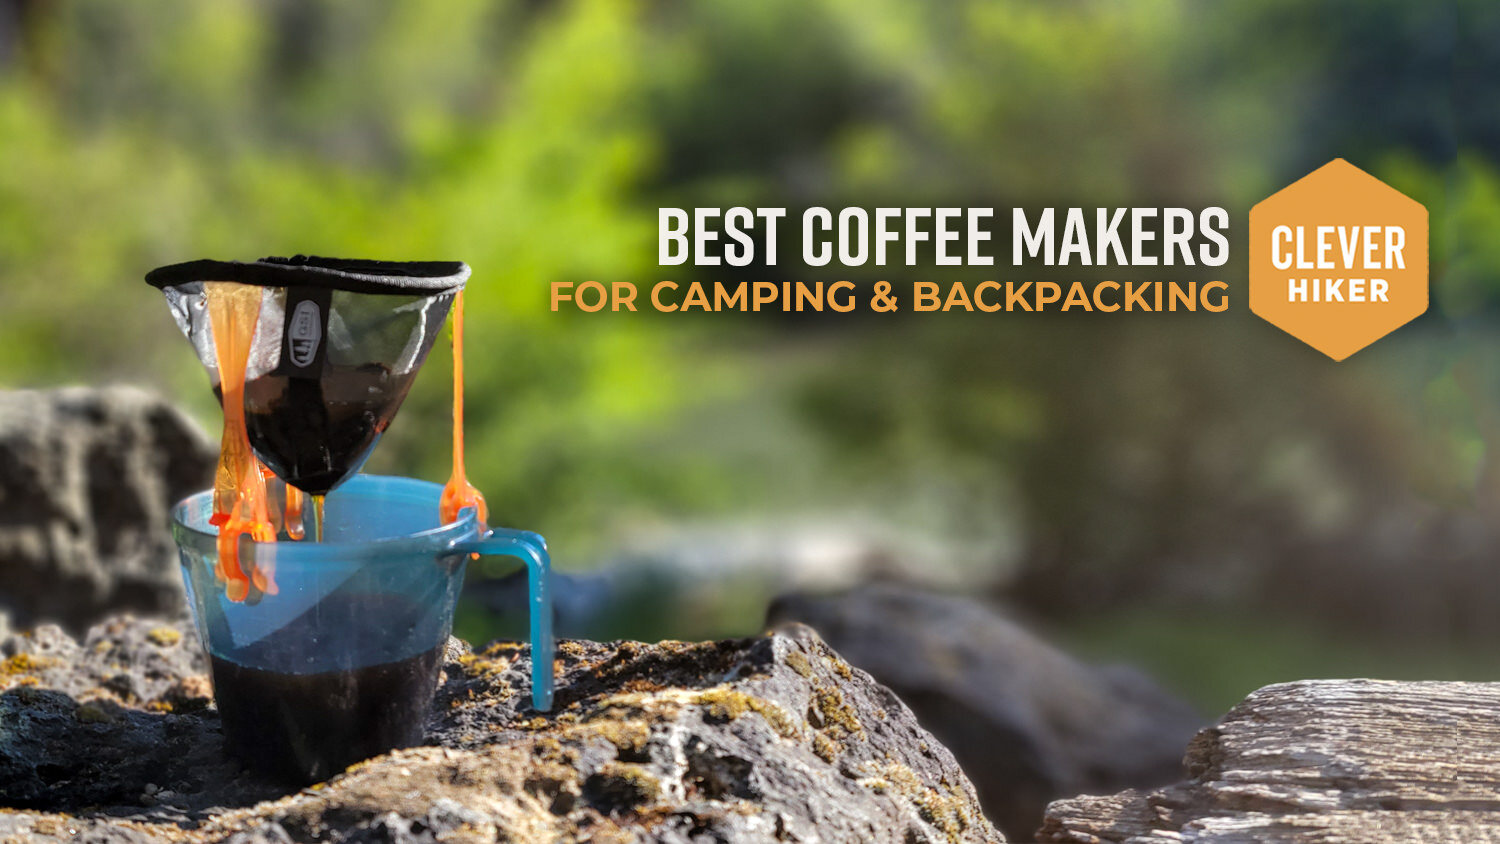 Best Coffee Makers for Camping and Backpacking